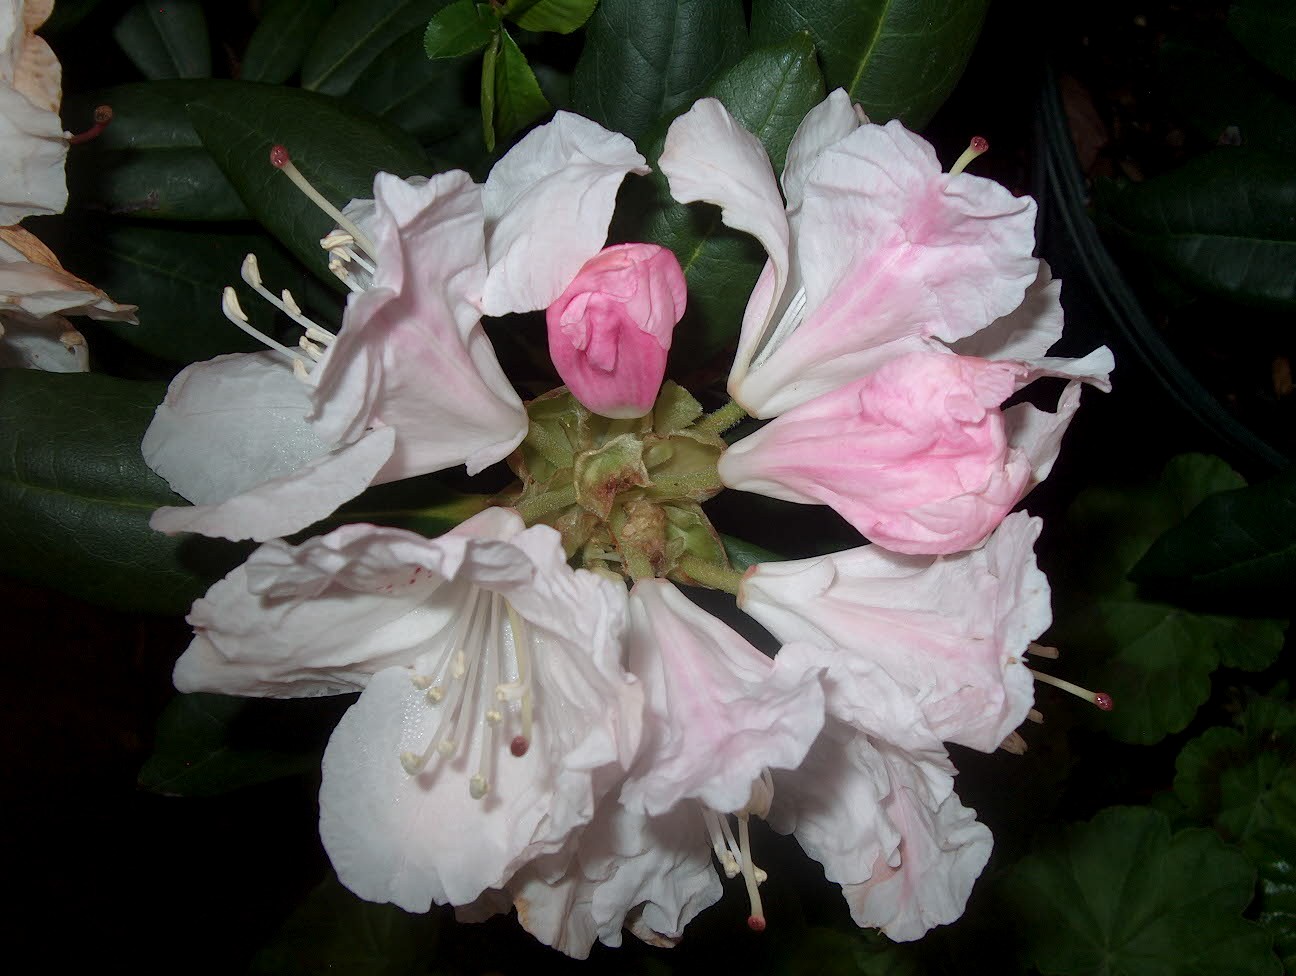 Rhododendron x 'Charles Loomis' / Rhododendron x 'Charles Loomis'